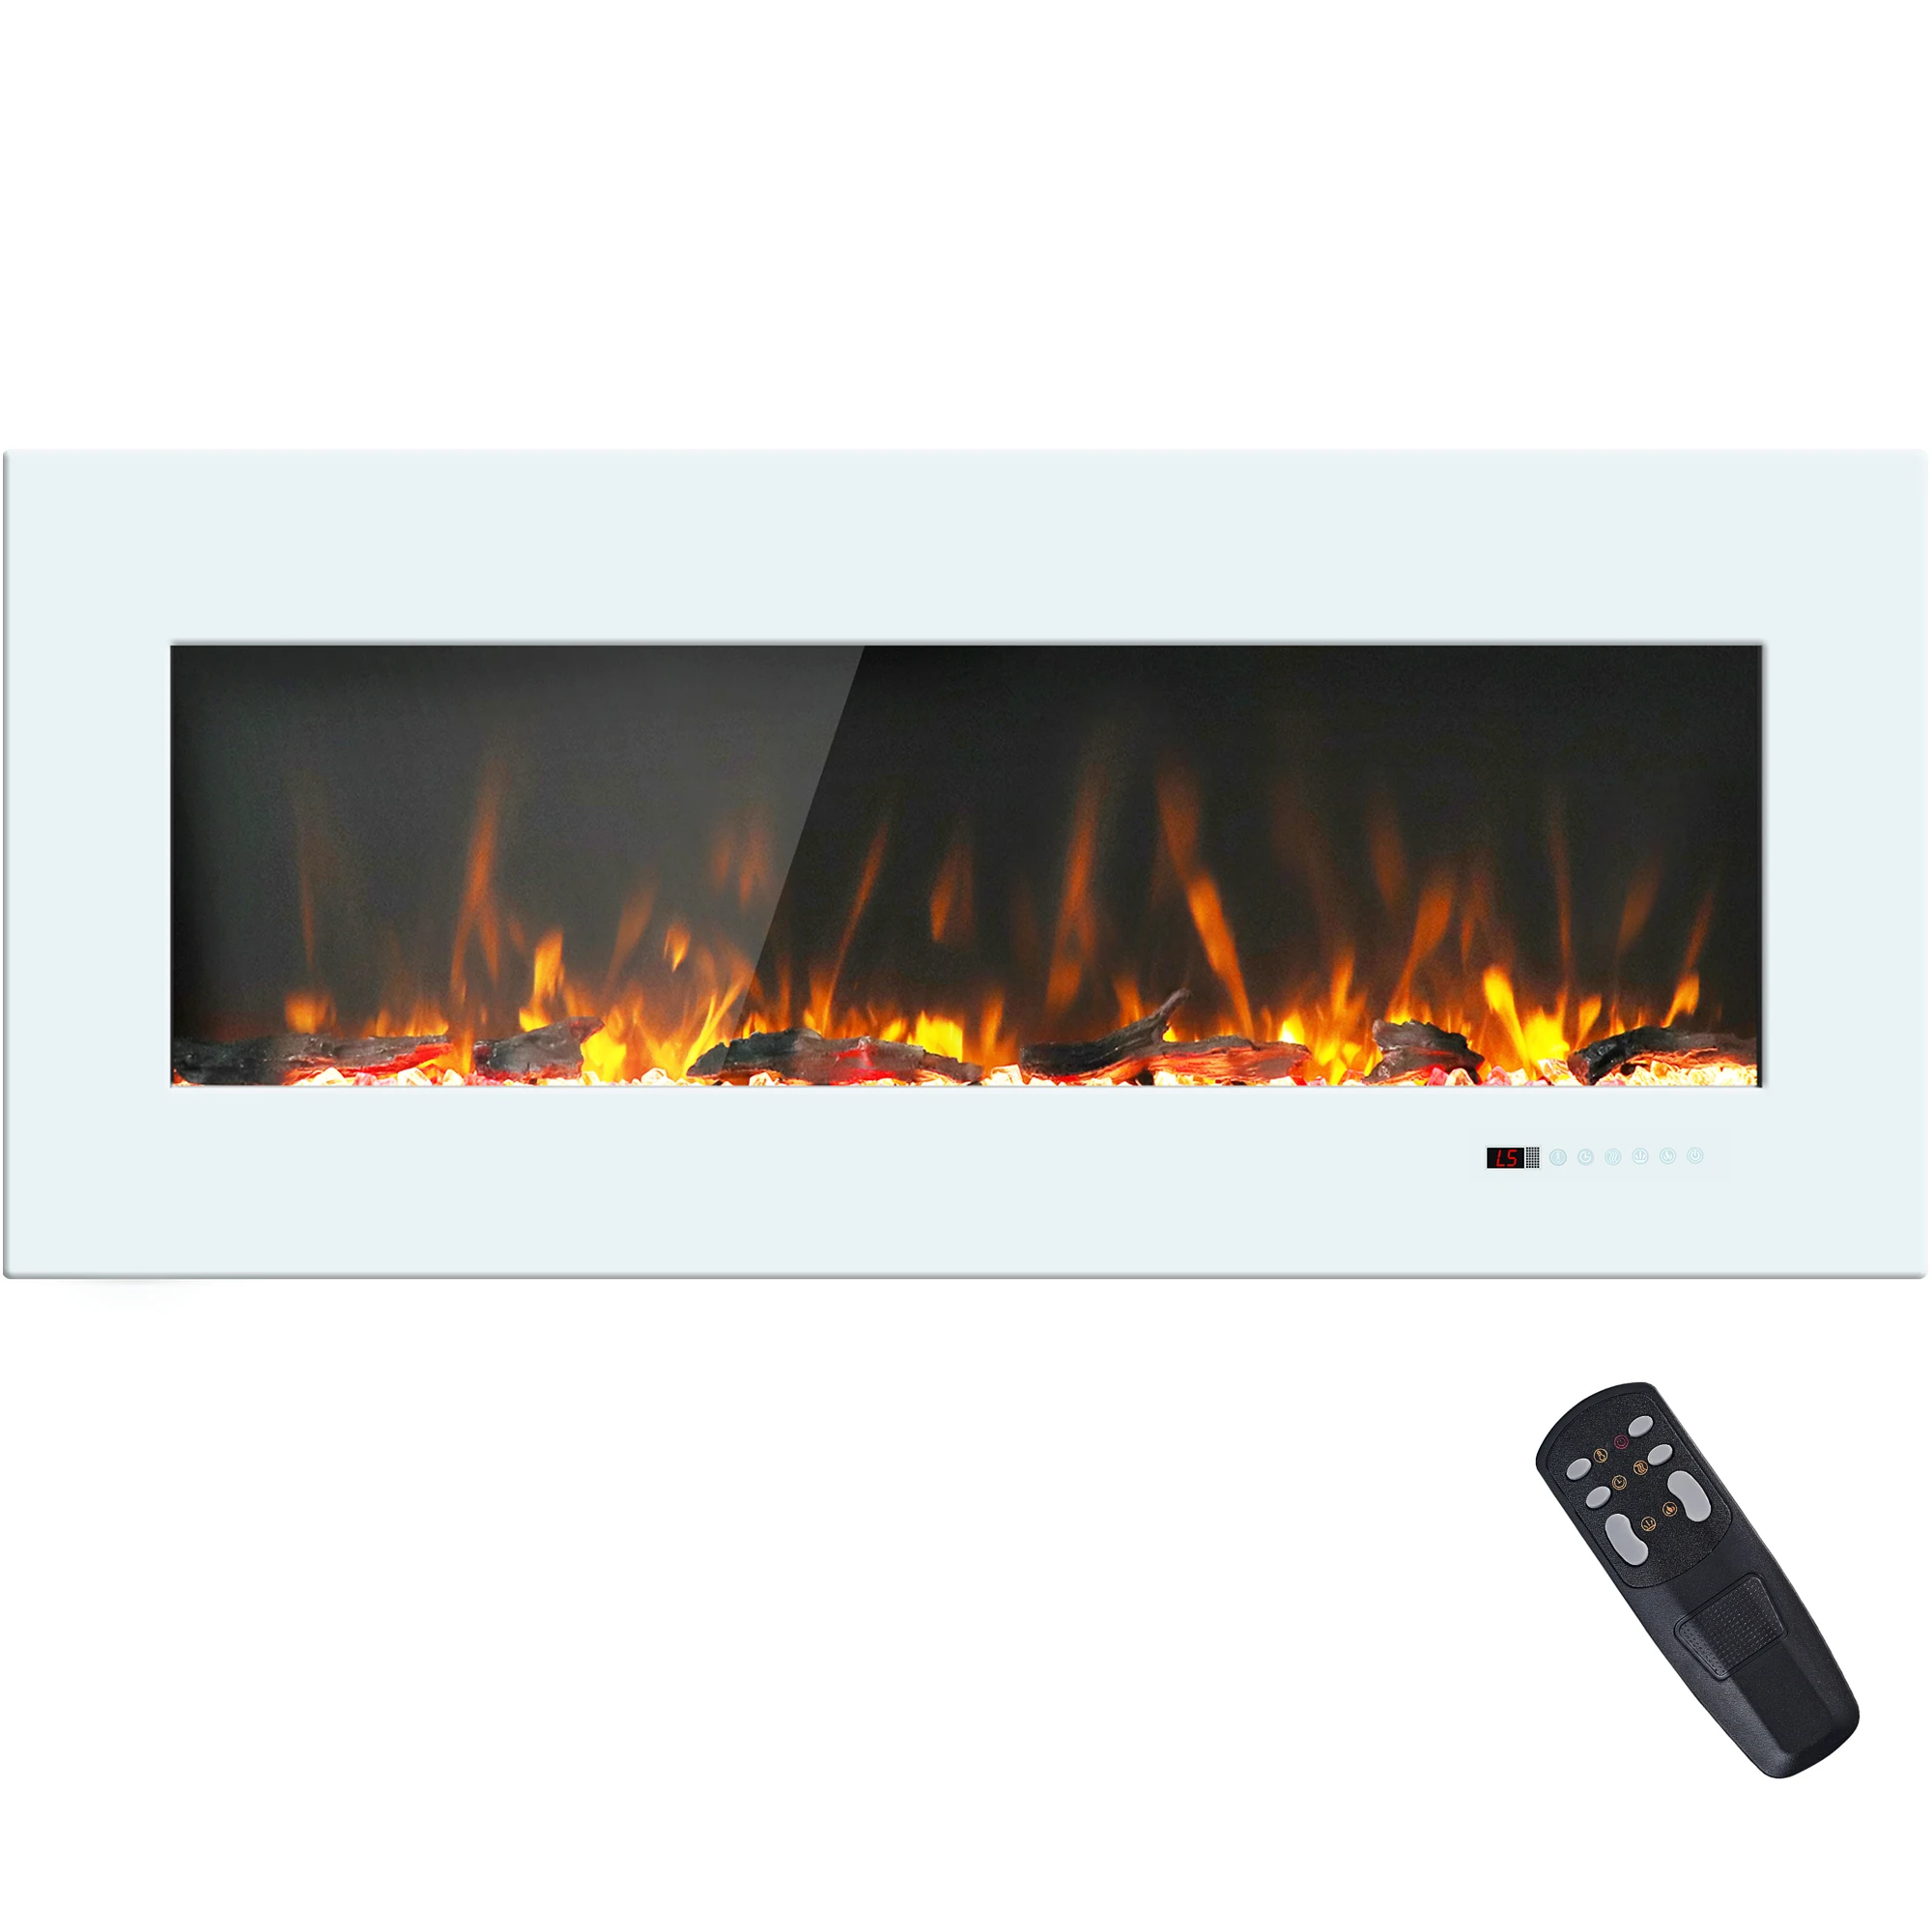 Luxstar 50 Inch White Wide Screen Home Electric Heaters with LED Technology